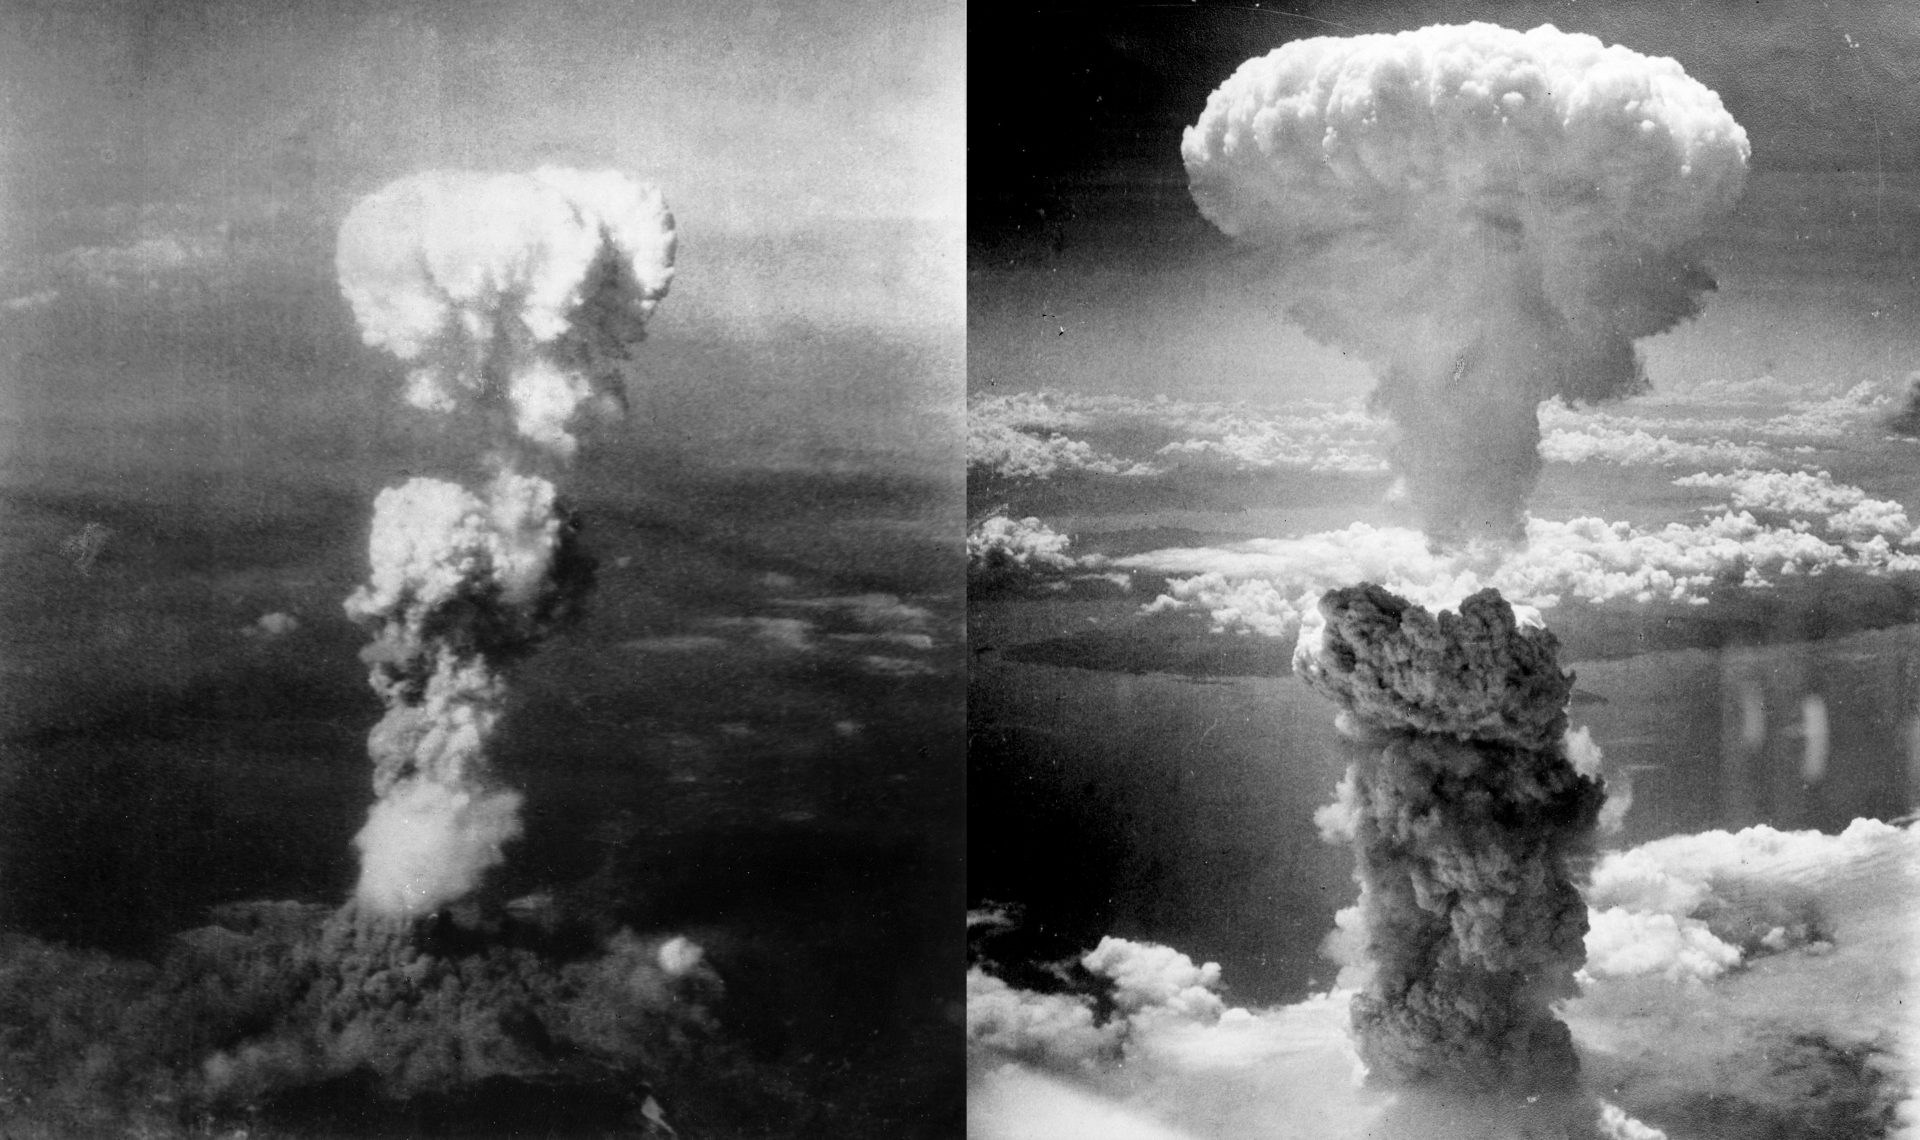 Atomic bombings of Hiroshima and Nagasaki, August 6th and 9th, 1945 (U.S. Department of Energy, WikiMedia)